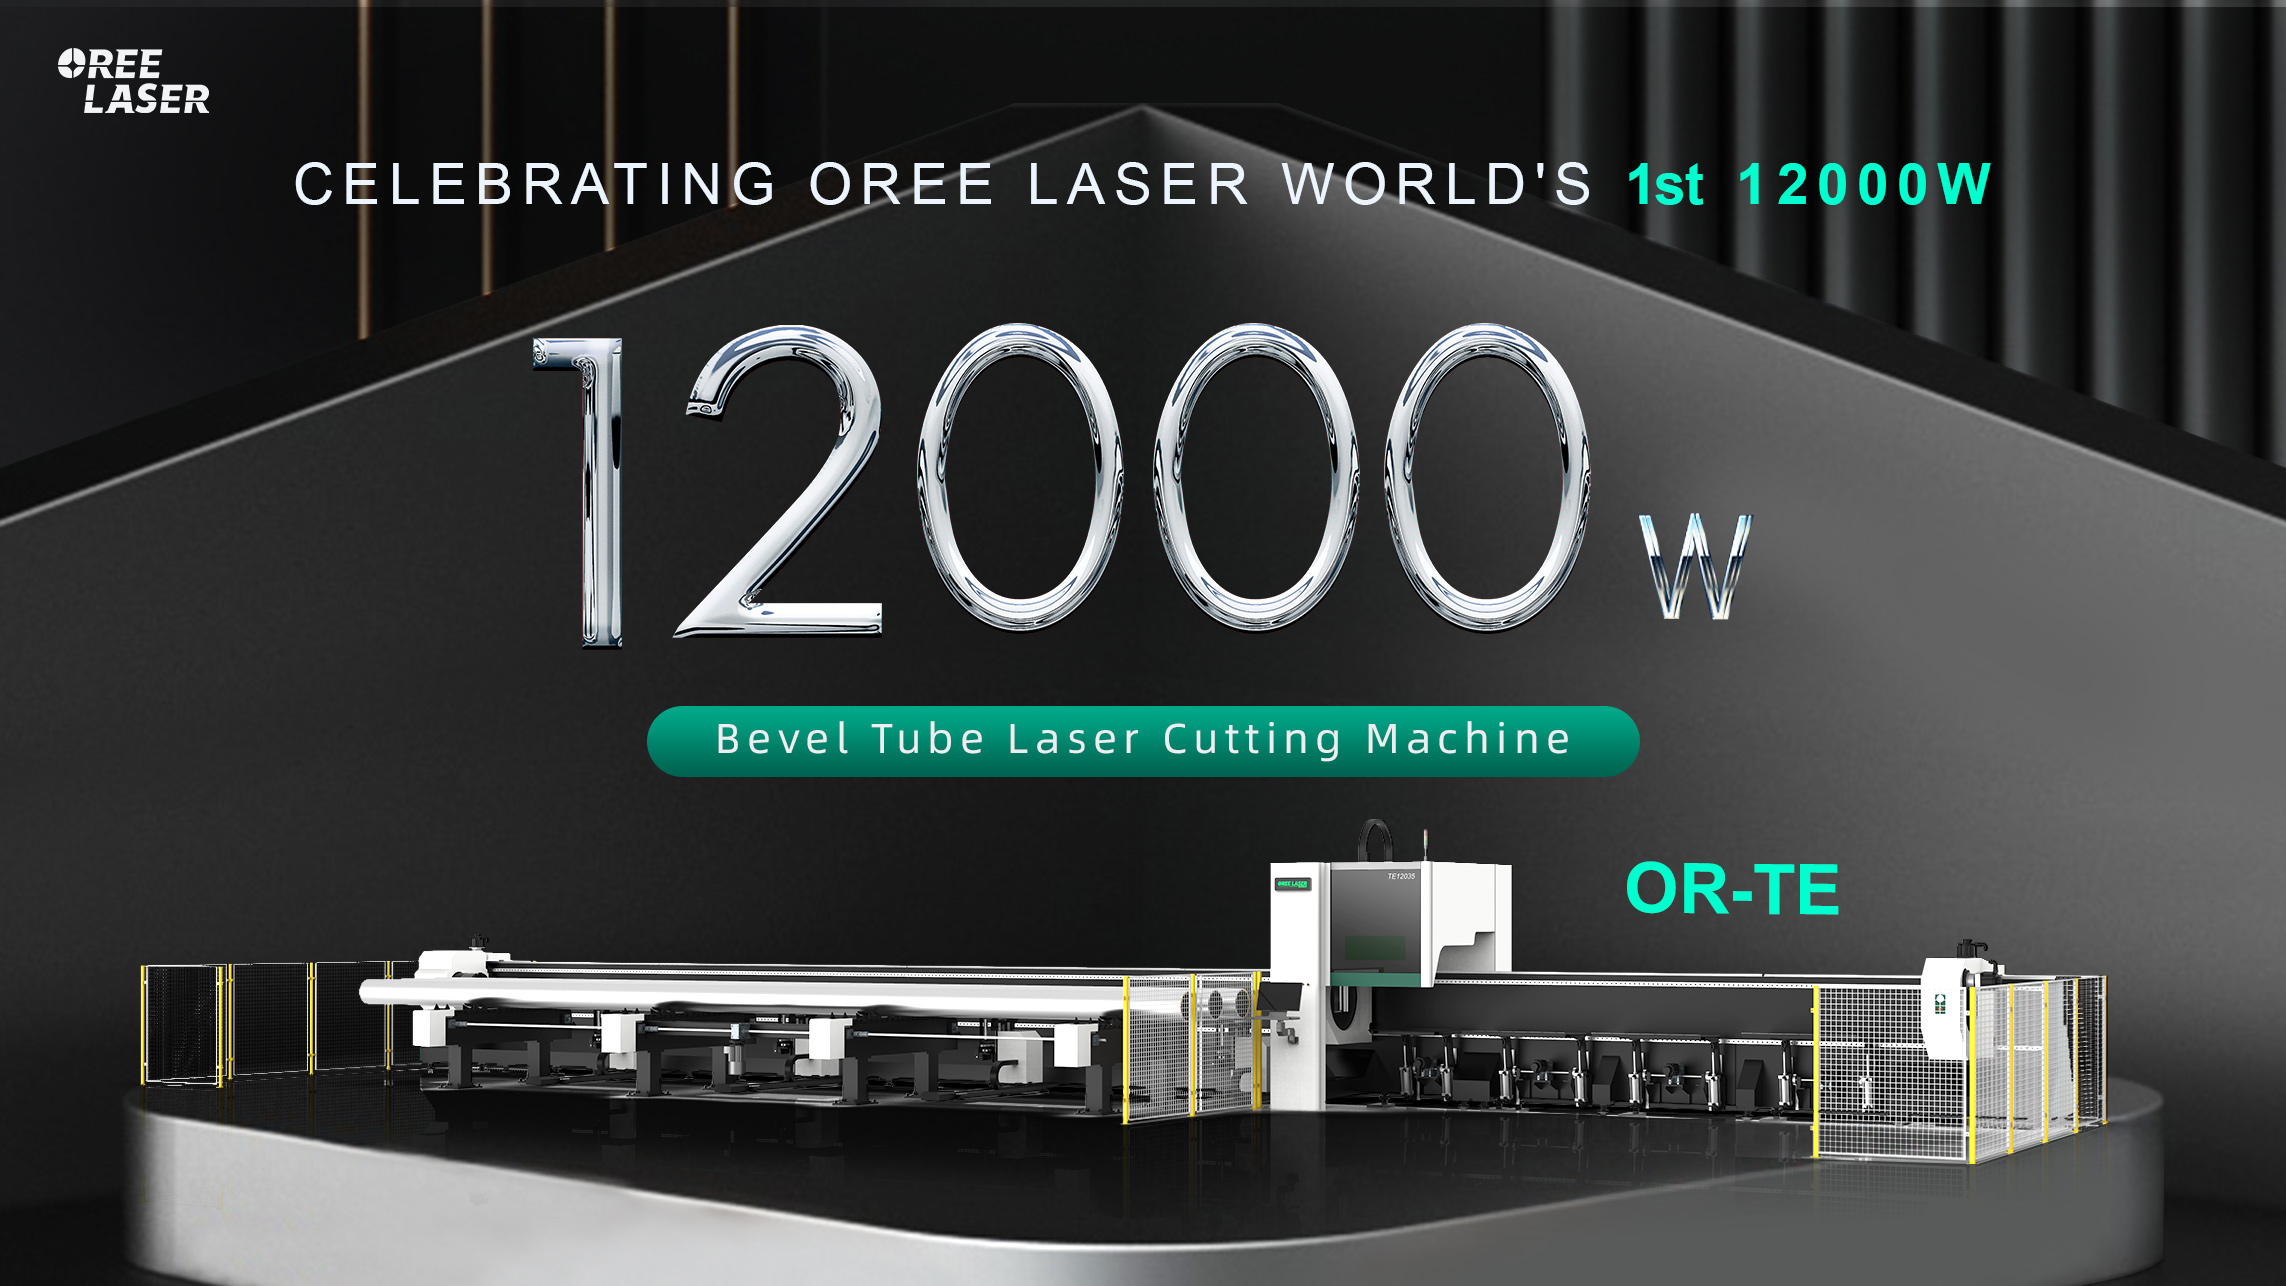 Introducing the revolutionary OR-TE, the world's first 12kW bevel tube laser cutting machine by Oree Laser. Packed with cutting-edge features, the OR-TE is designed to take your tube cutting capabilities to new heights. Let's take a closer look at its rem